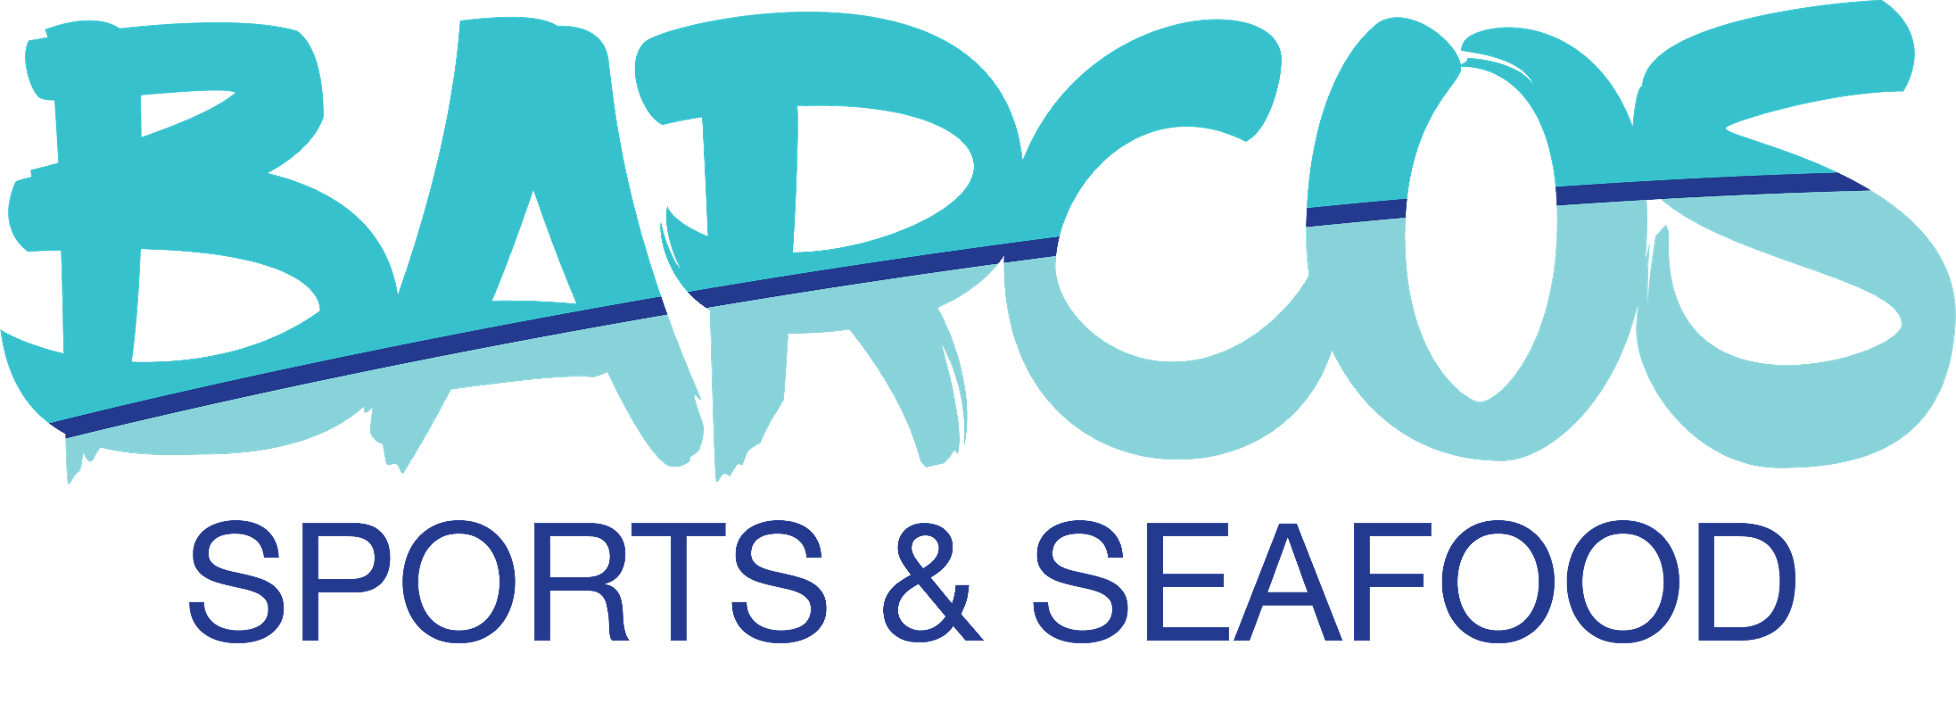 Barcos Sports & Seafood